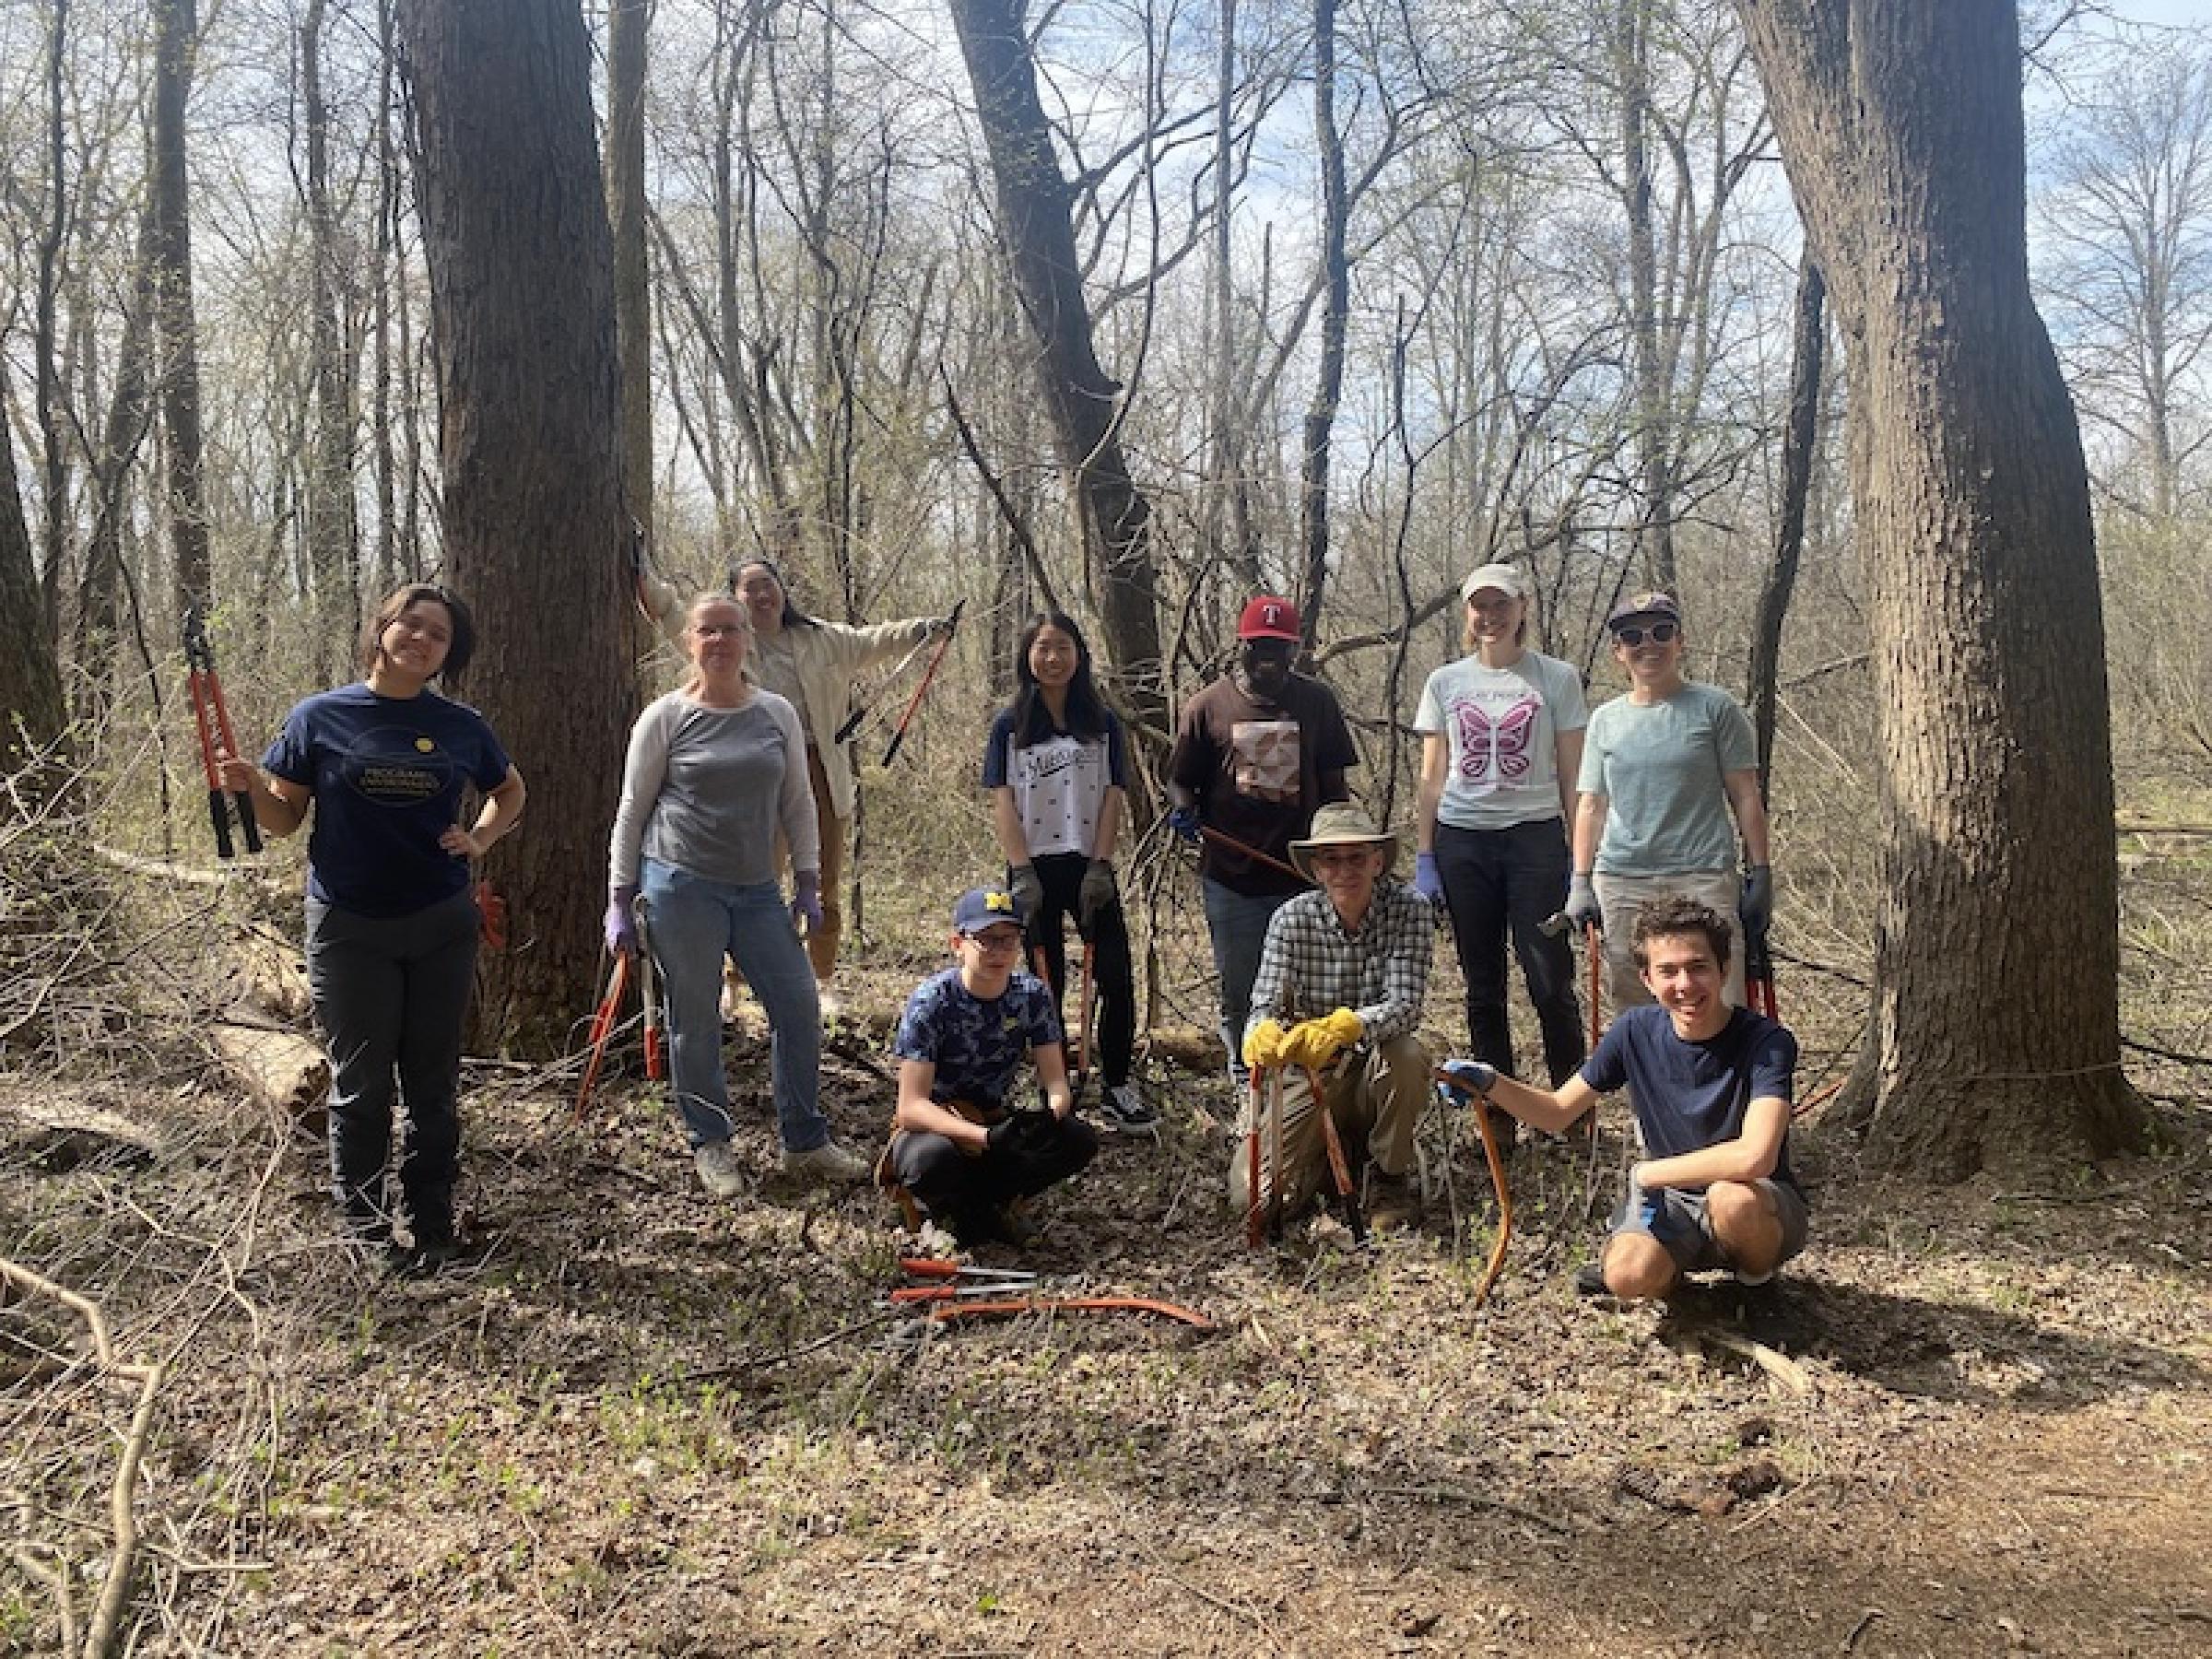 Eco-workday volunteers together in the woods